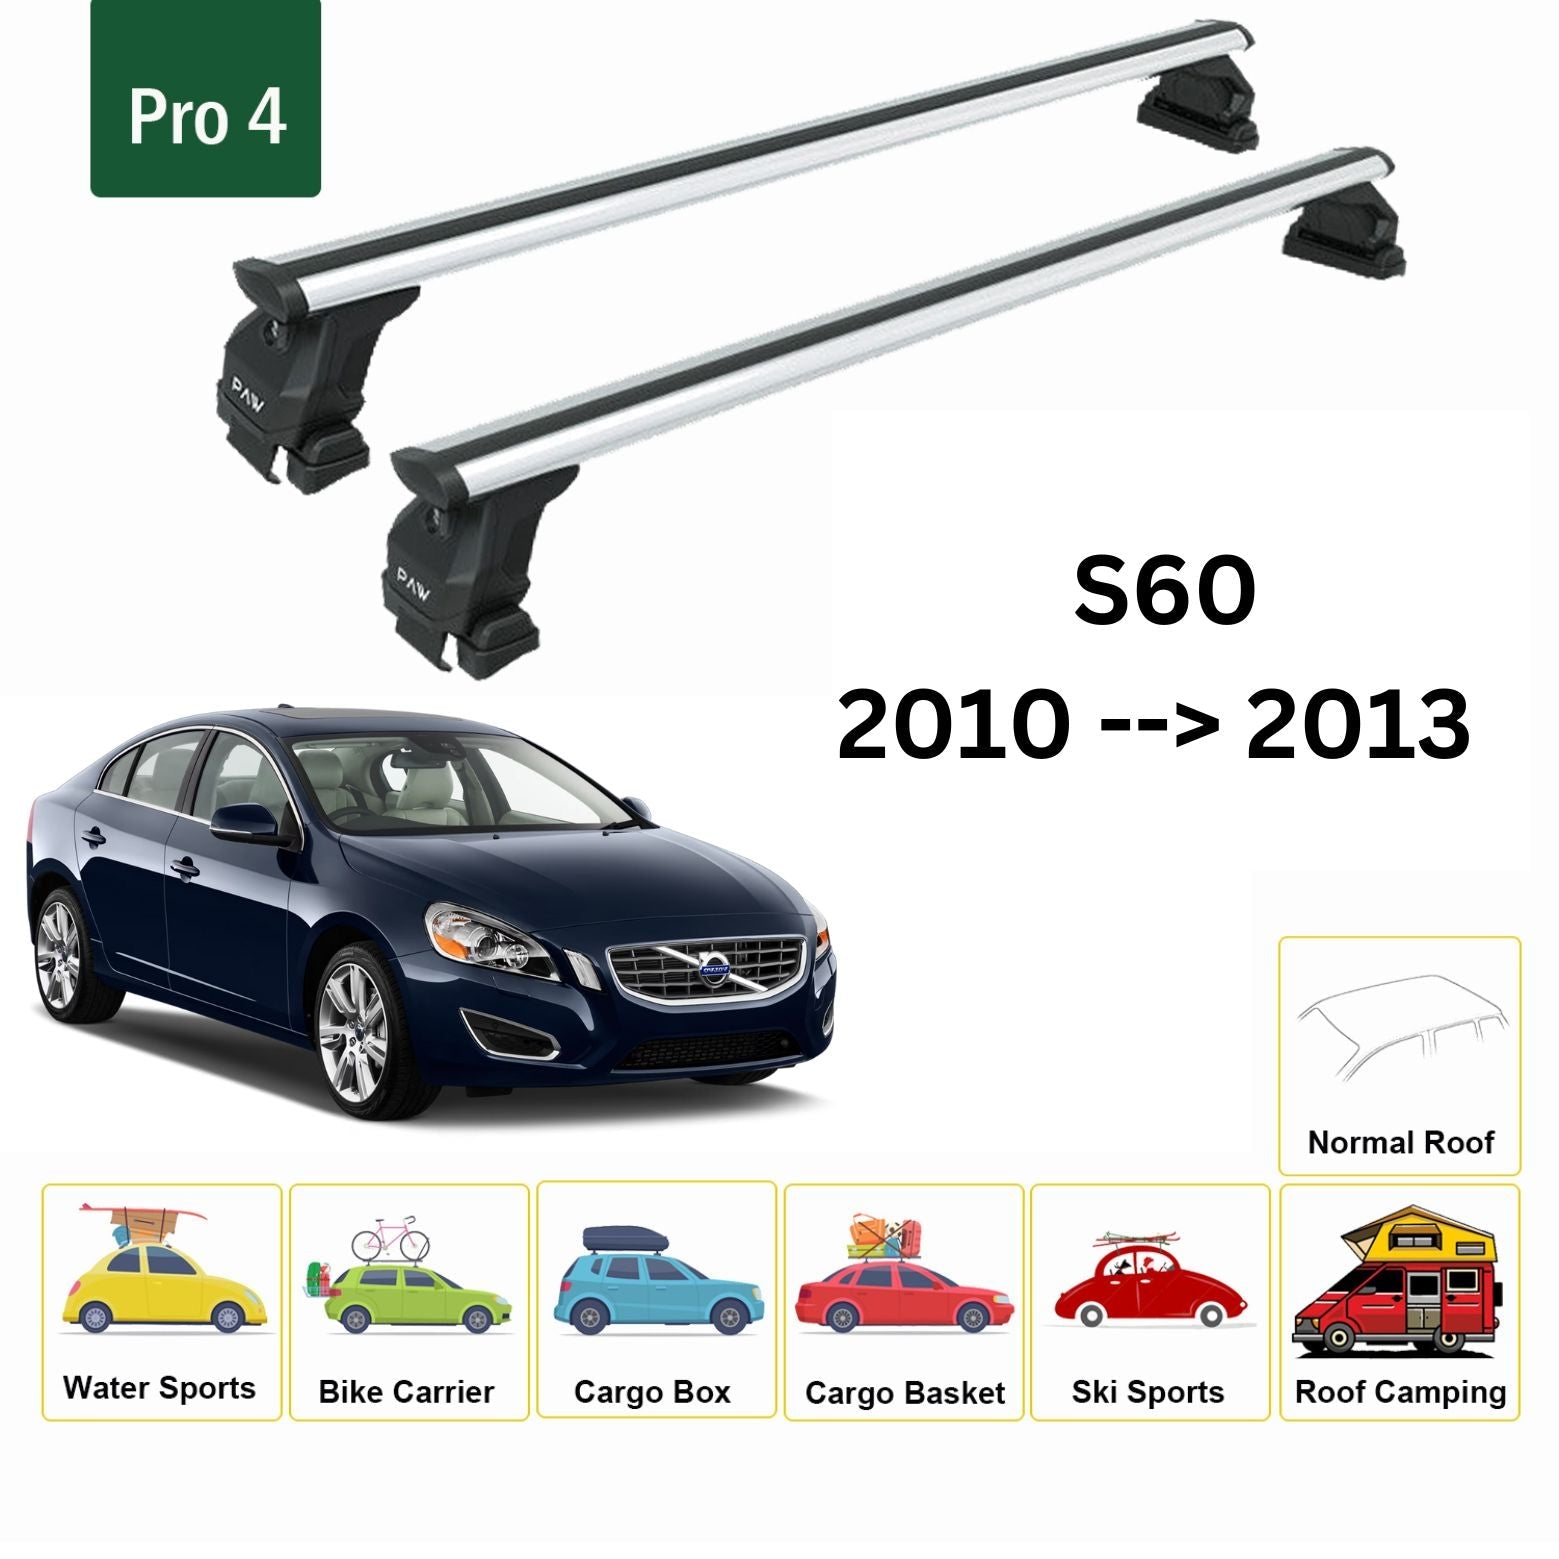 For Volvo S60 2010-13 Roof Rack Cross Bar Normal Roof Alu Silver - 0